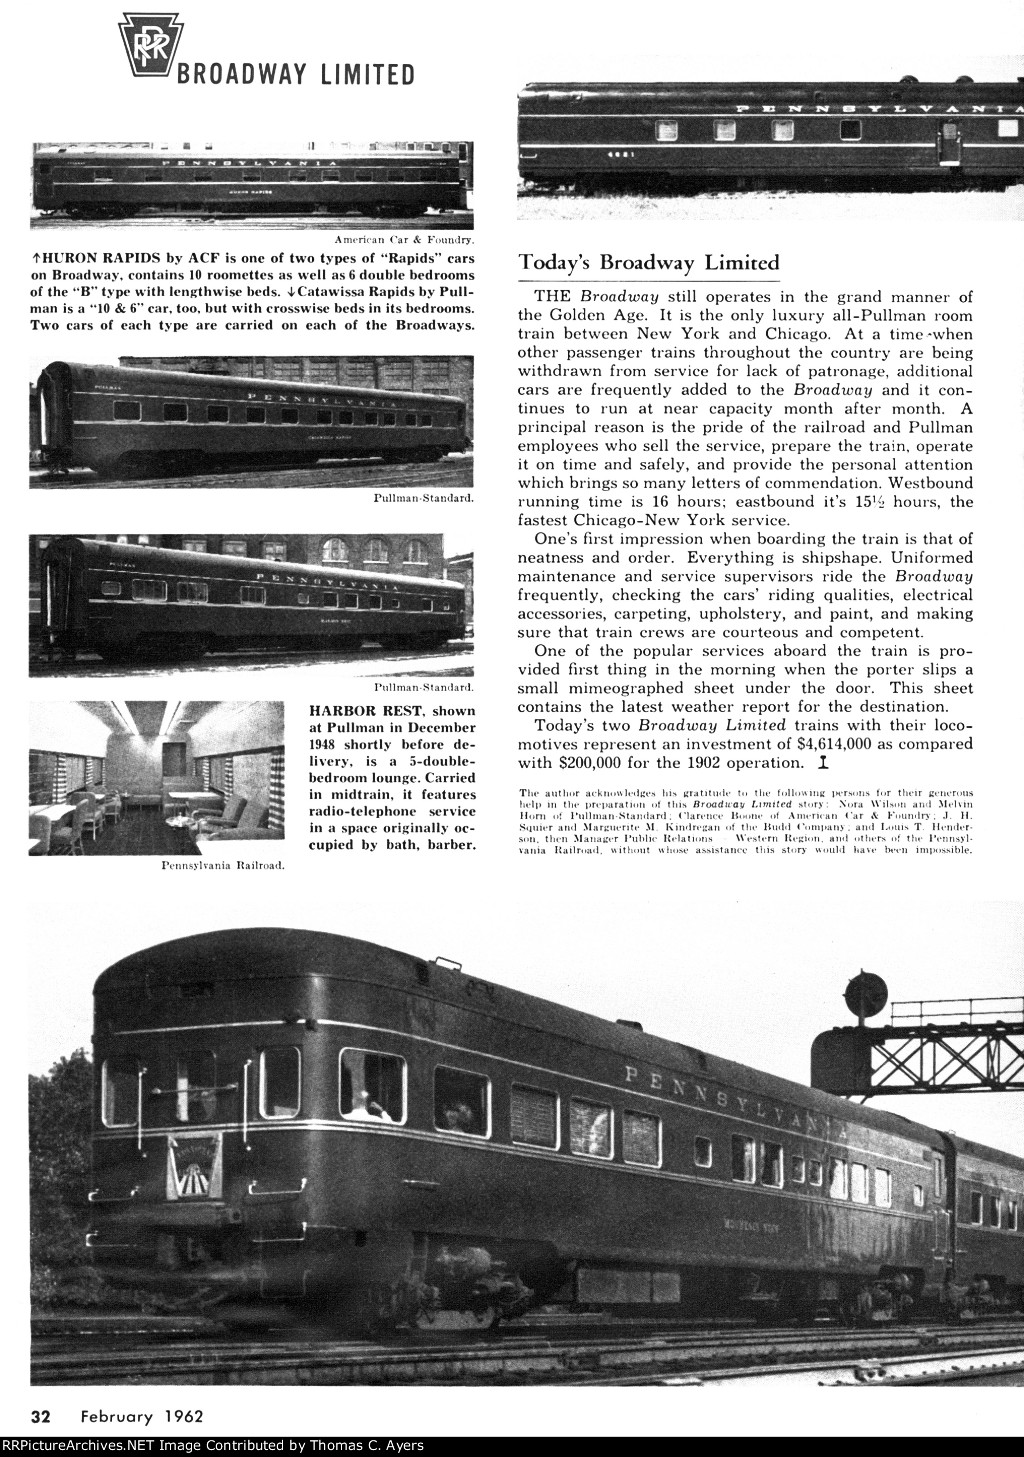 "The Broadway Limited," Page 32, 1962